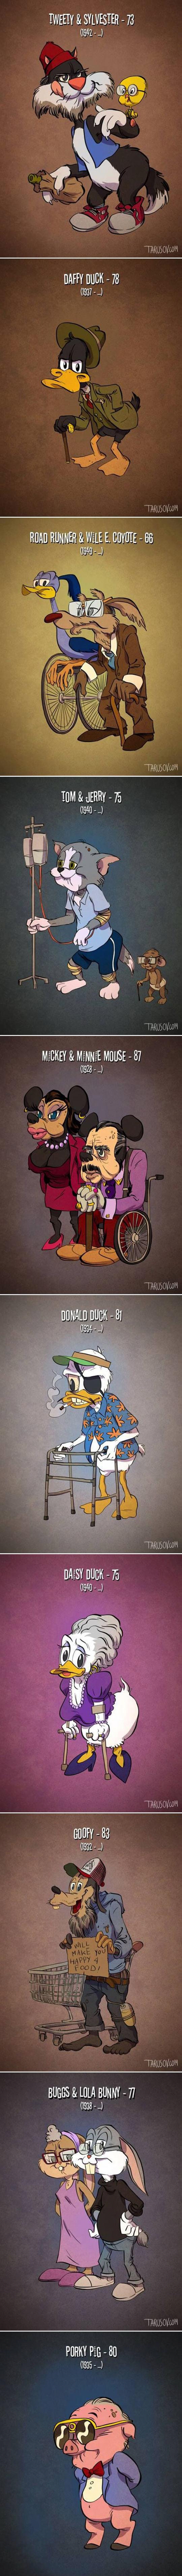 If Cartoon Characters Looked Their Actual Age